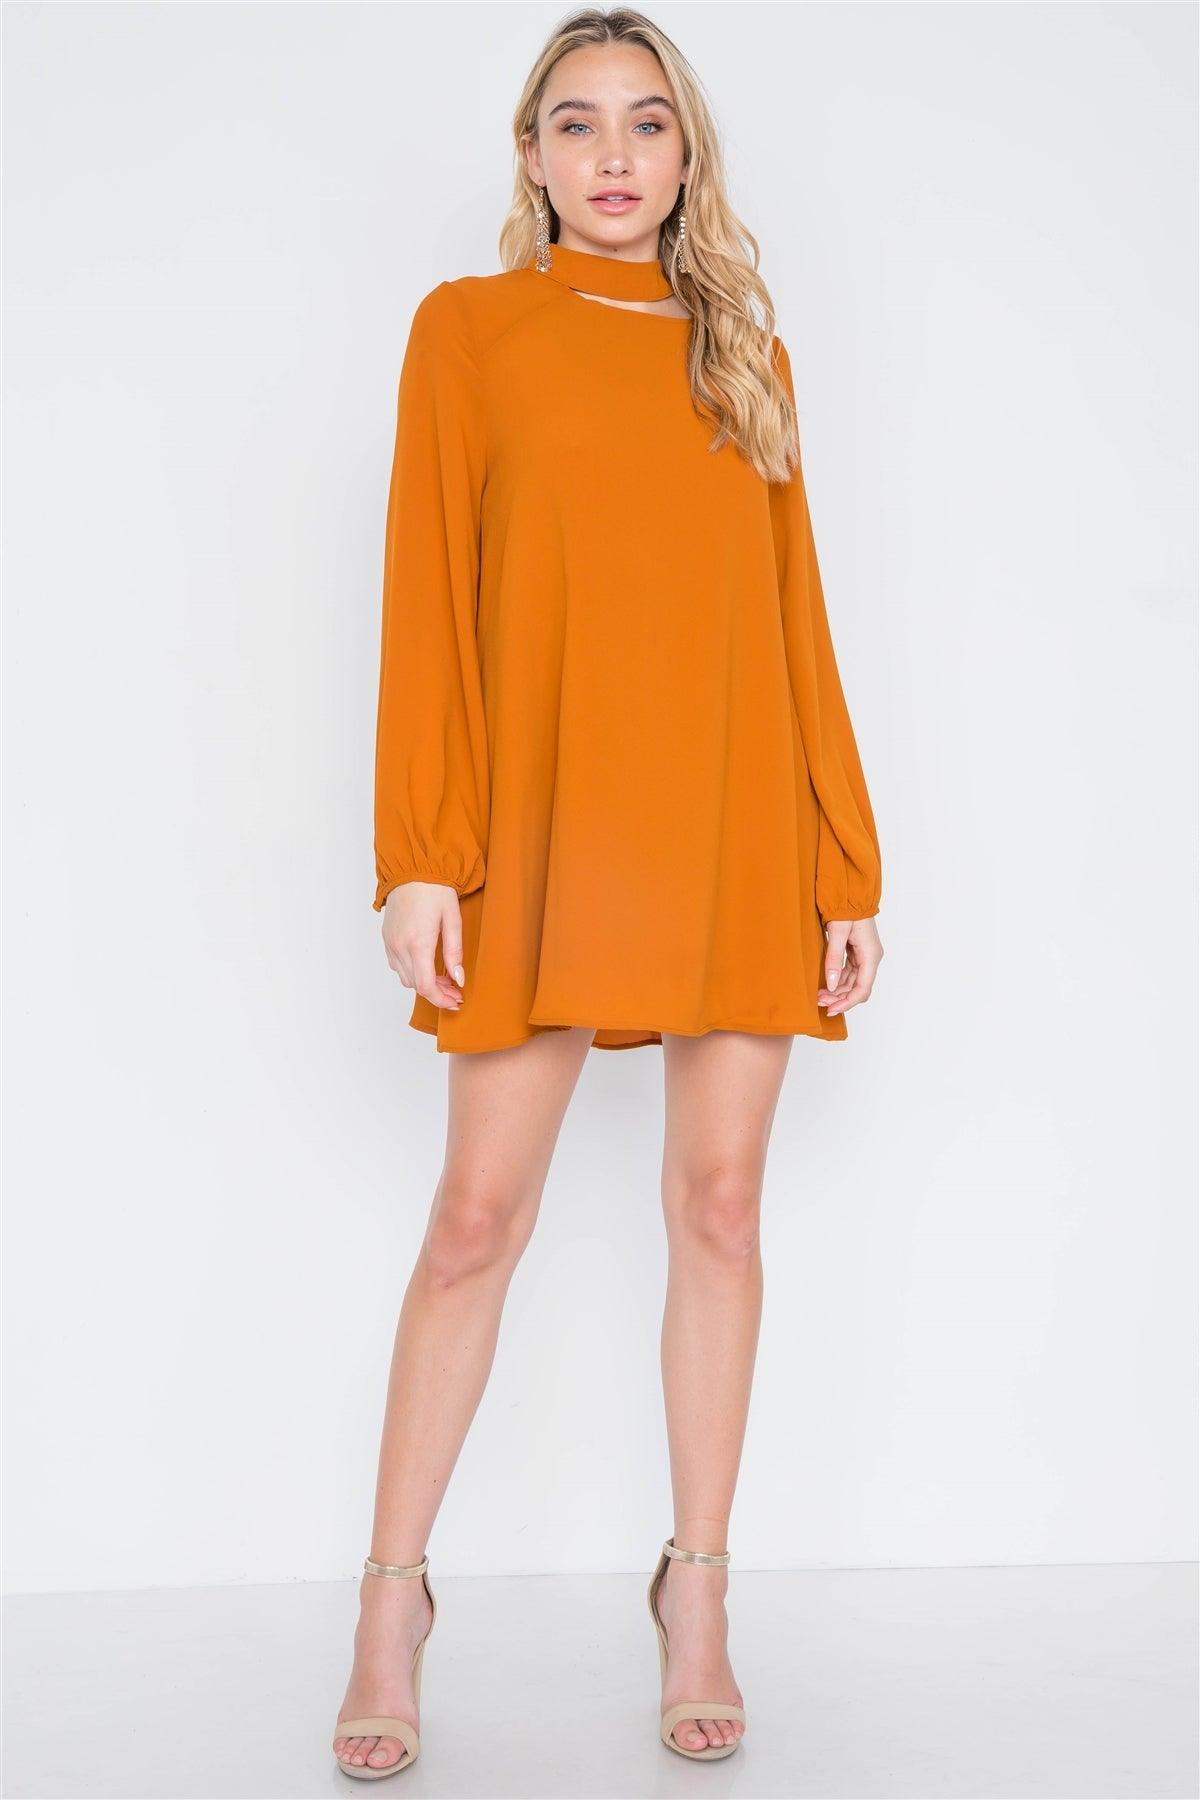 Camel Cut-Out Neck Solid Long Sleeve Dress /2-2-2